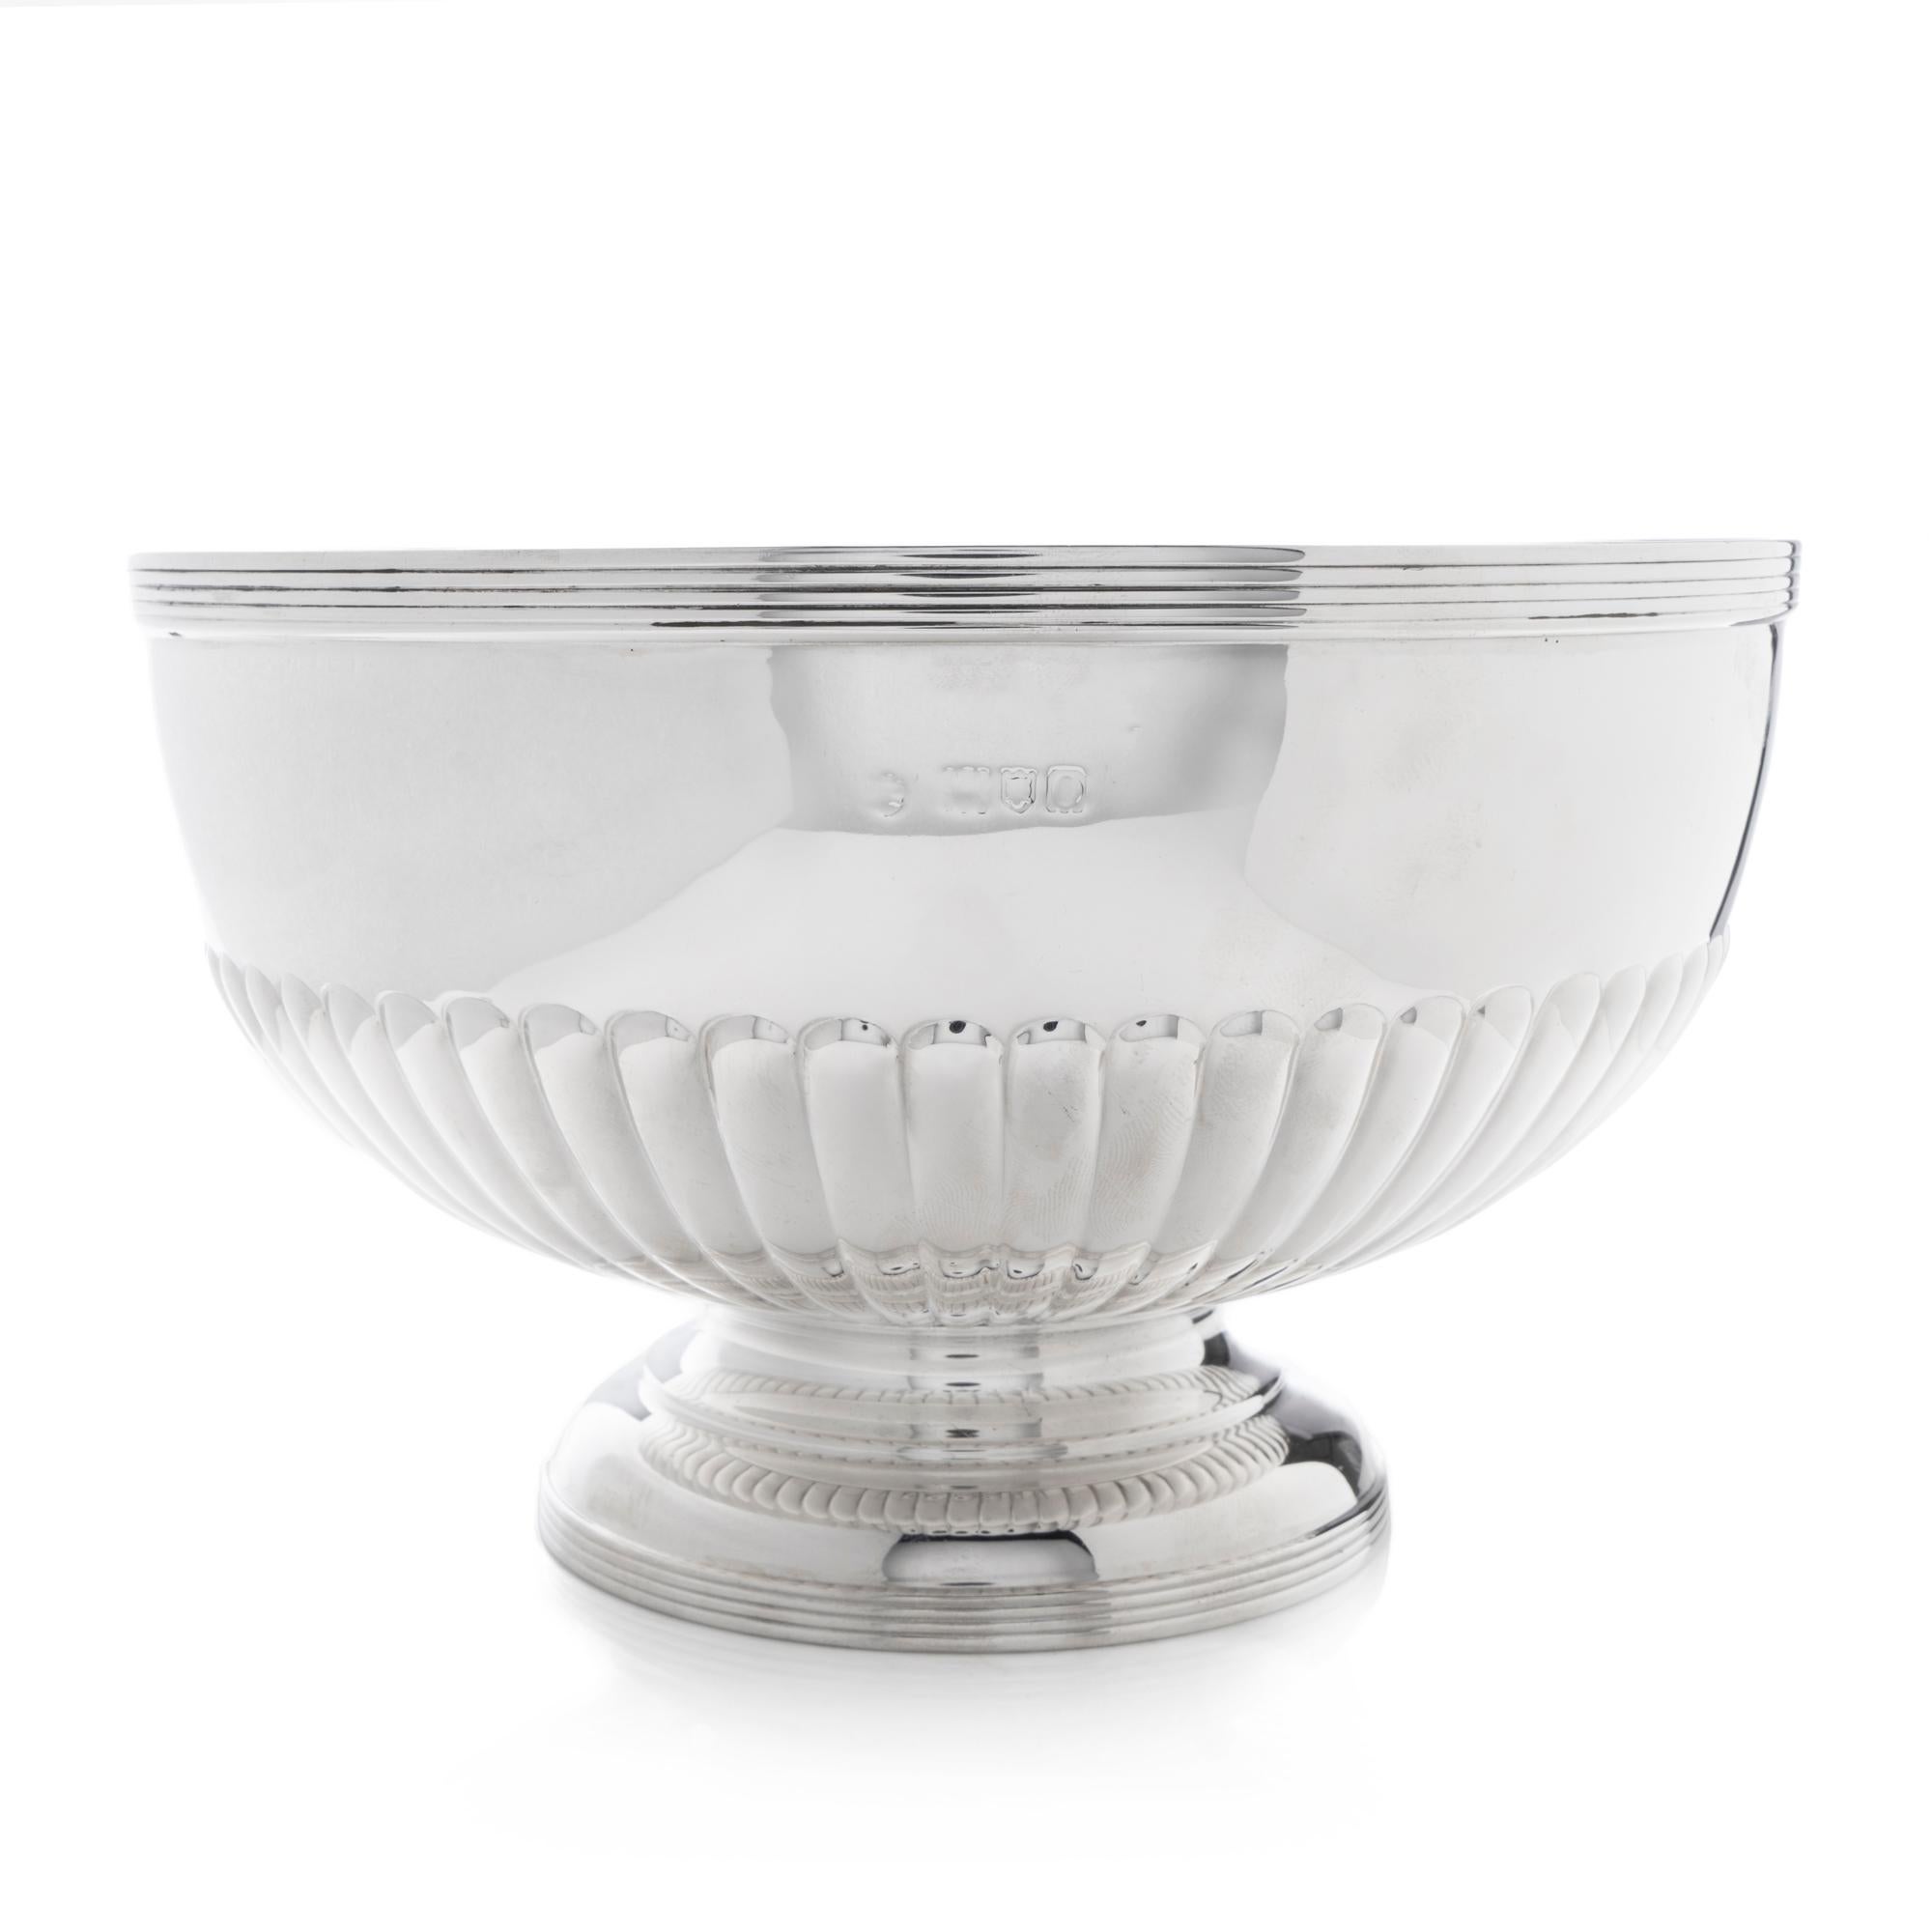 Antique sterling silver bowl.
Made in England, London 1909
Maker: Lowe Chester
Fully hallmarked. 

Dimensions - 
Diameter: 20.4 cm
Height: 12.5 cm
Total Weight: 496 grams

Condition: Pre-owned, minor signs of usage, excellent condition